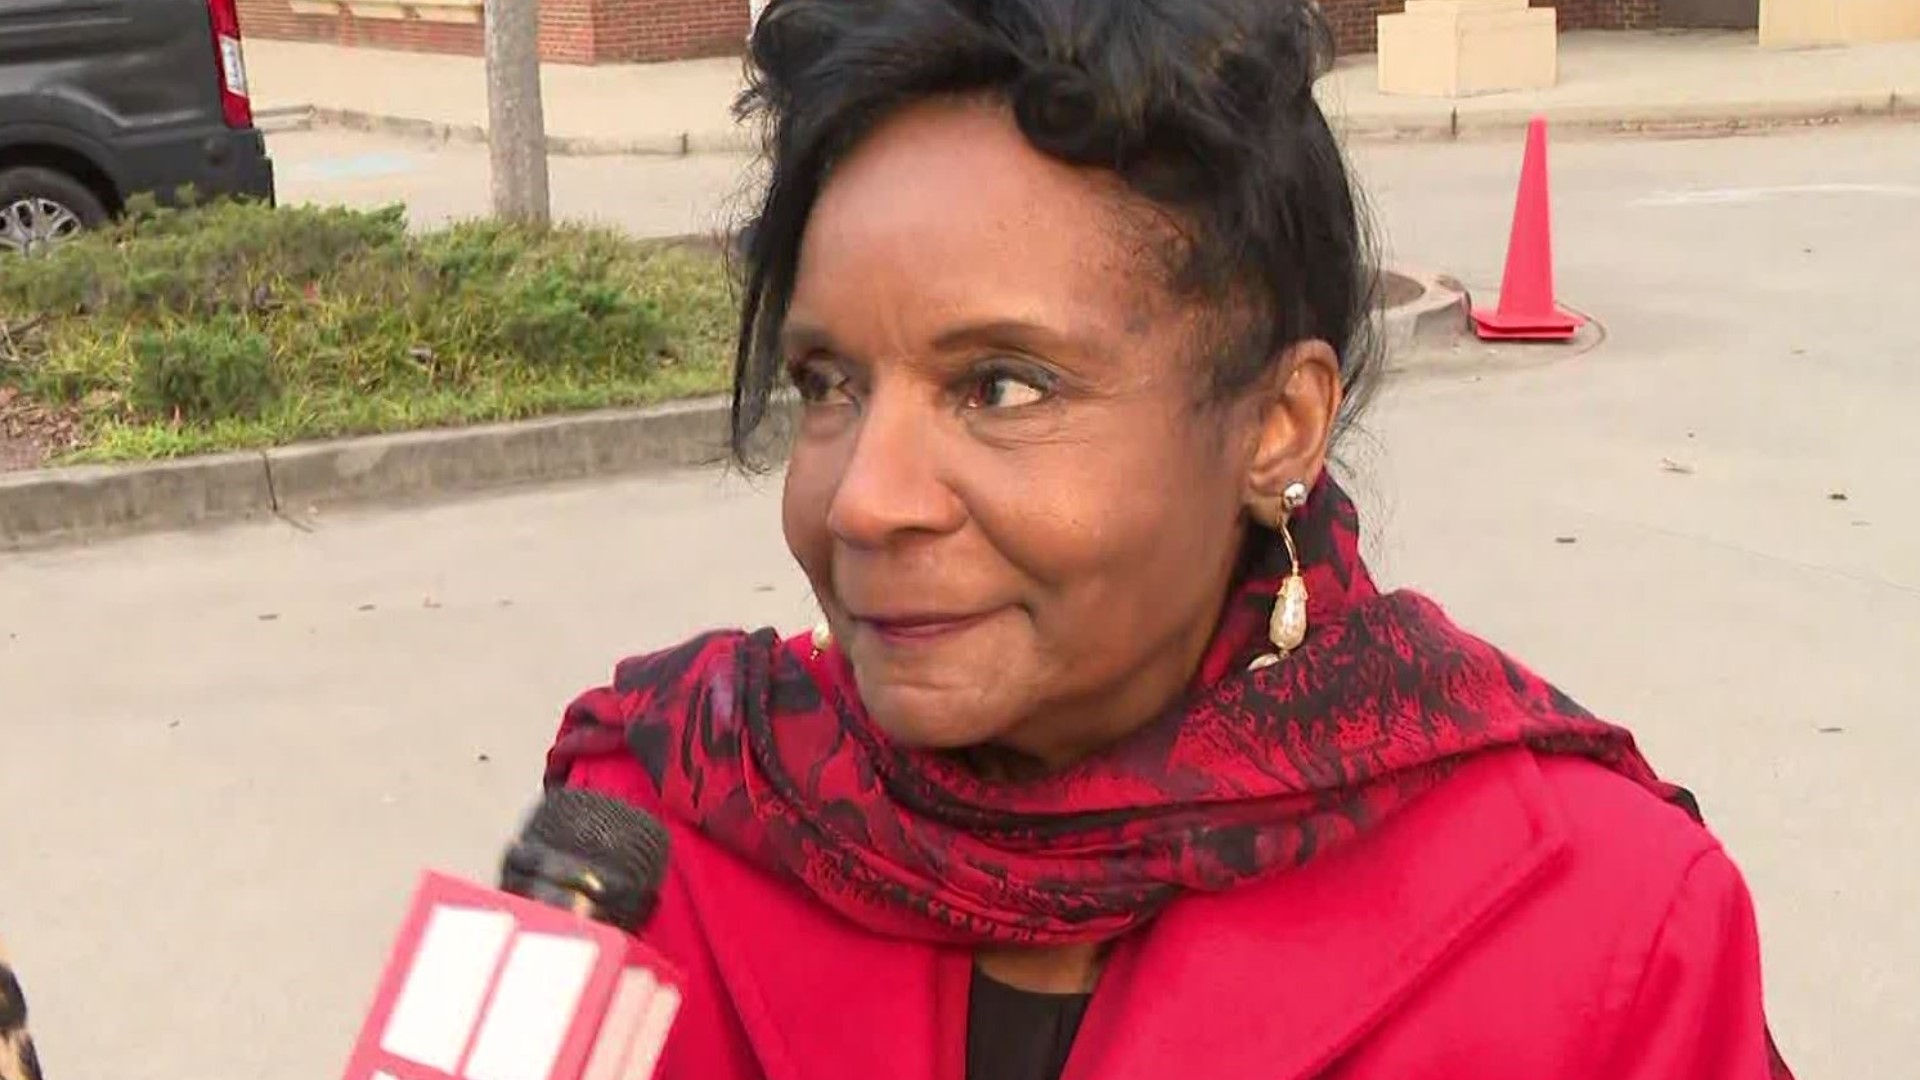 It was 40 years ago, when 11Alive’s community relations manager at the time, Sheryl Gripper, reached out to the Salvation Army about partnering to collect food items